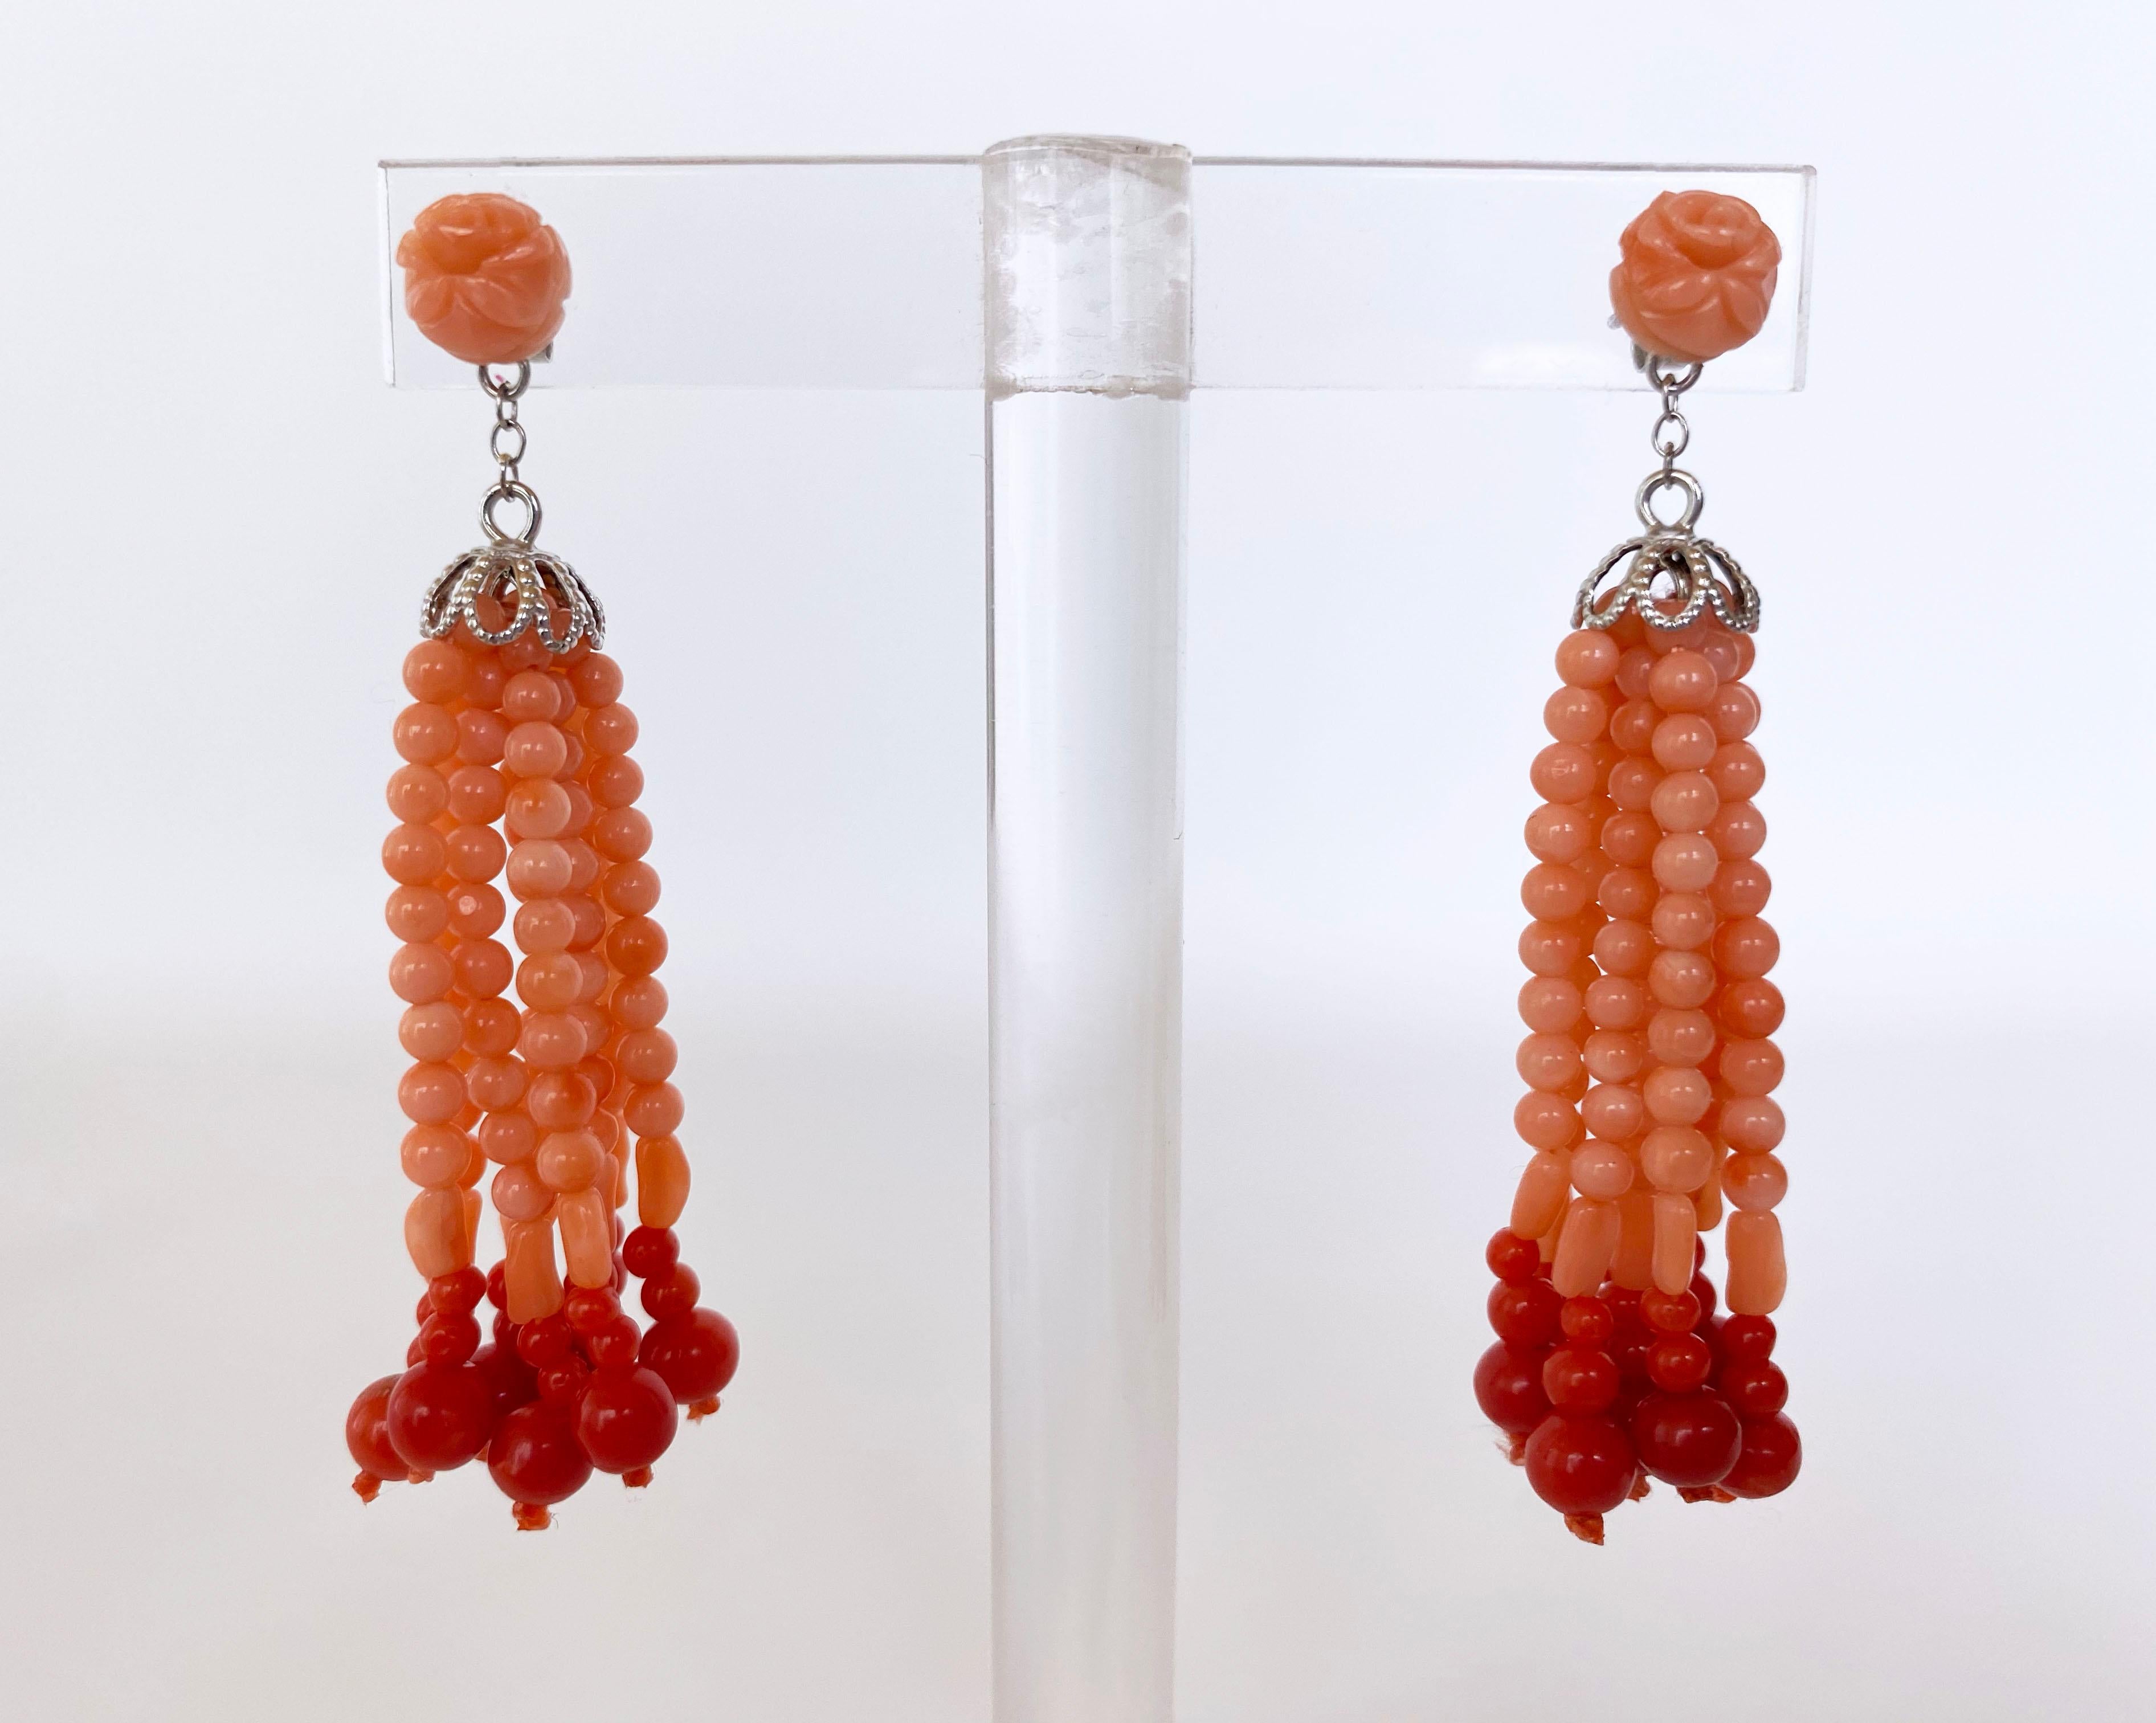 Beautiful and playful pair of earrings made by Marina J. This innocent pair is made of Mediterranean Coral beads displaying a gorgeous soft Pink/Orange hue, strung together with a slight graduation and accented by Red Mediterranean Coral. These